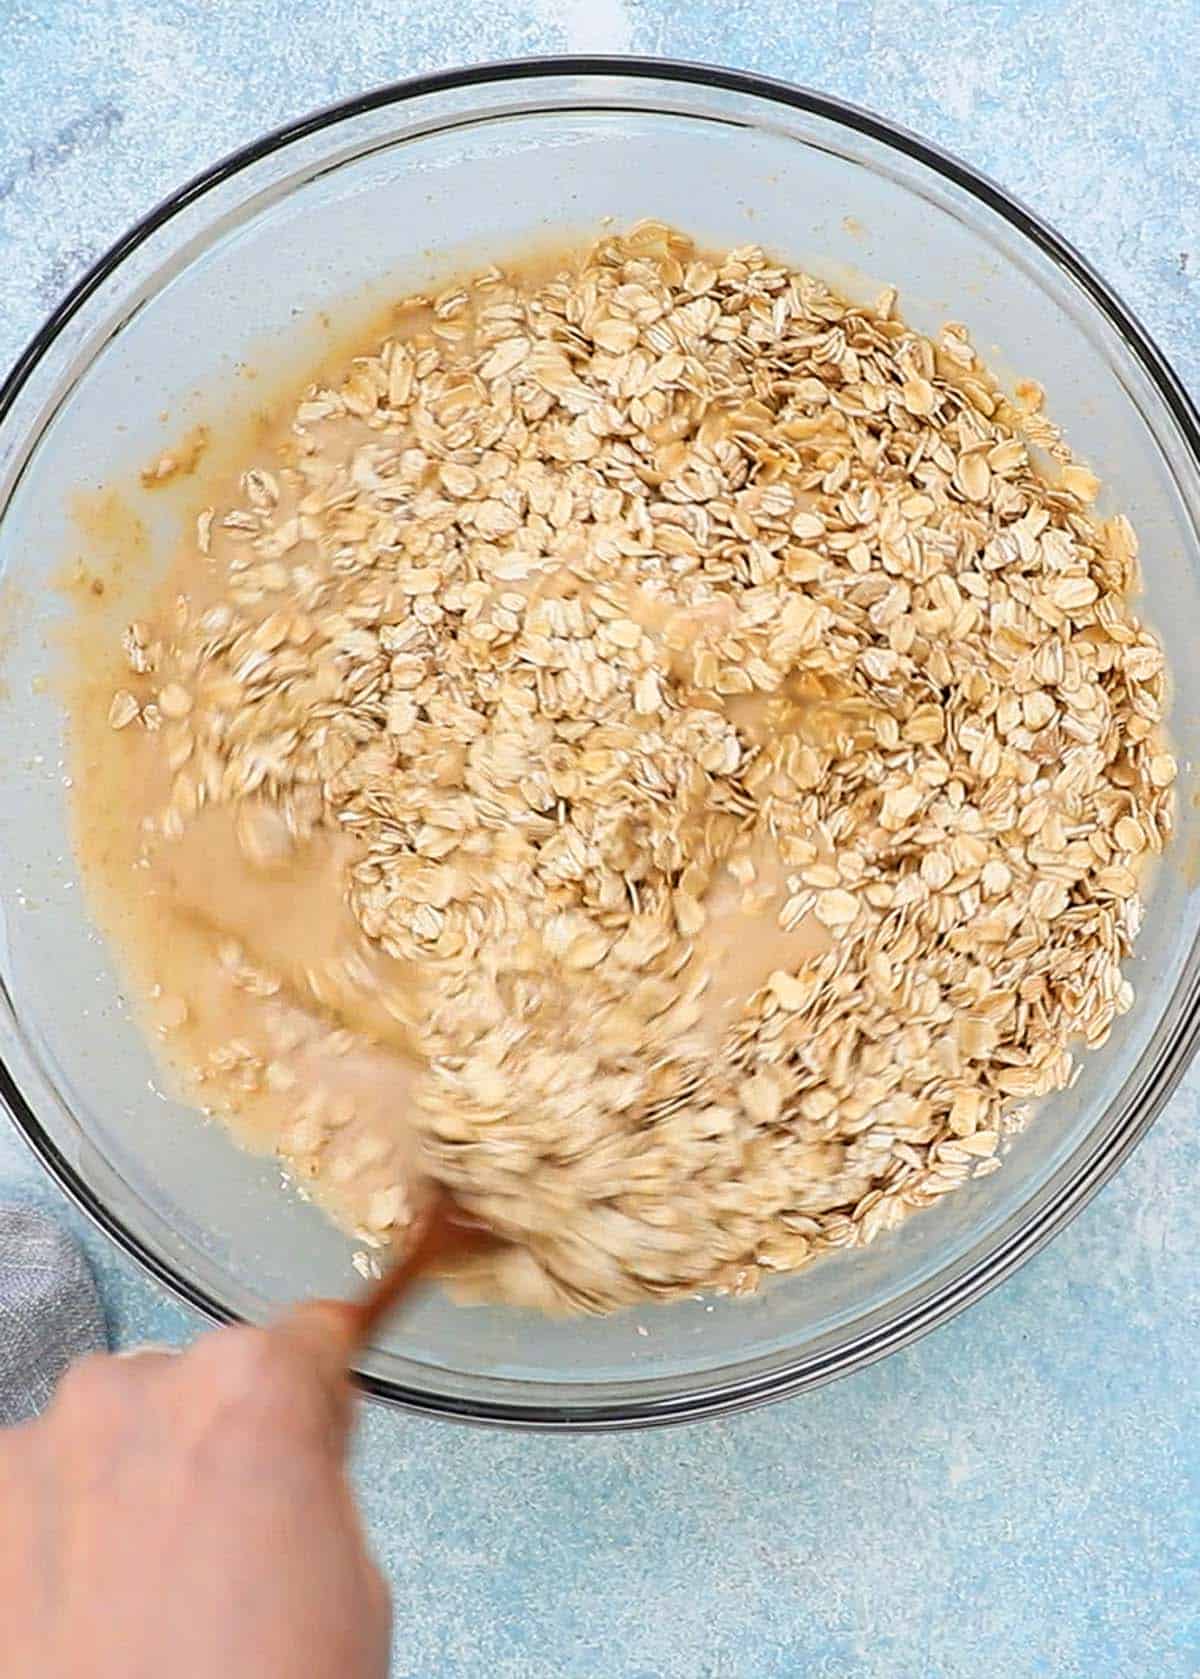 a hand stirring oats along with wet ingredients in a glass bowl.